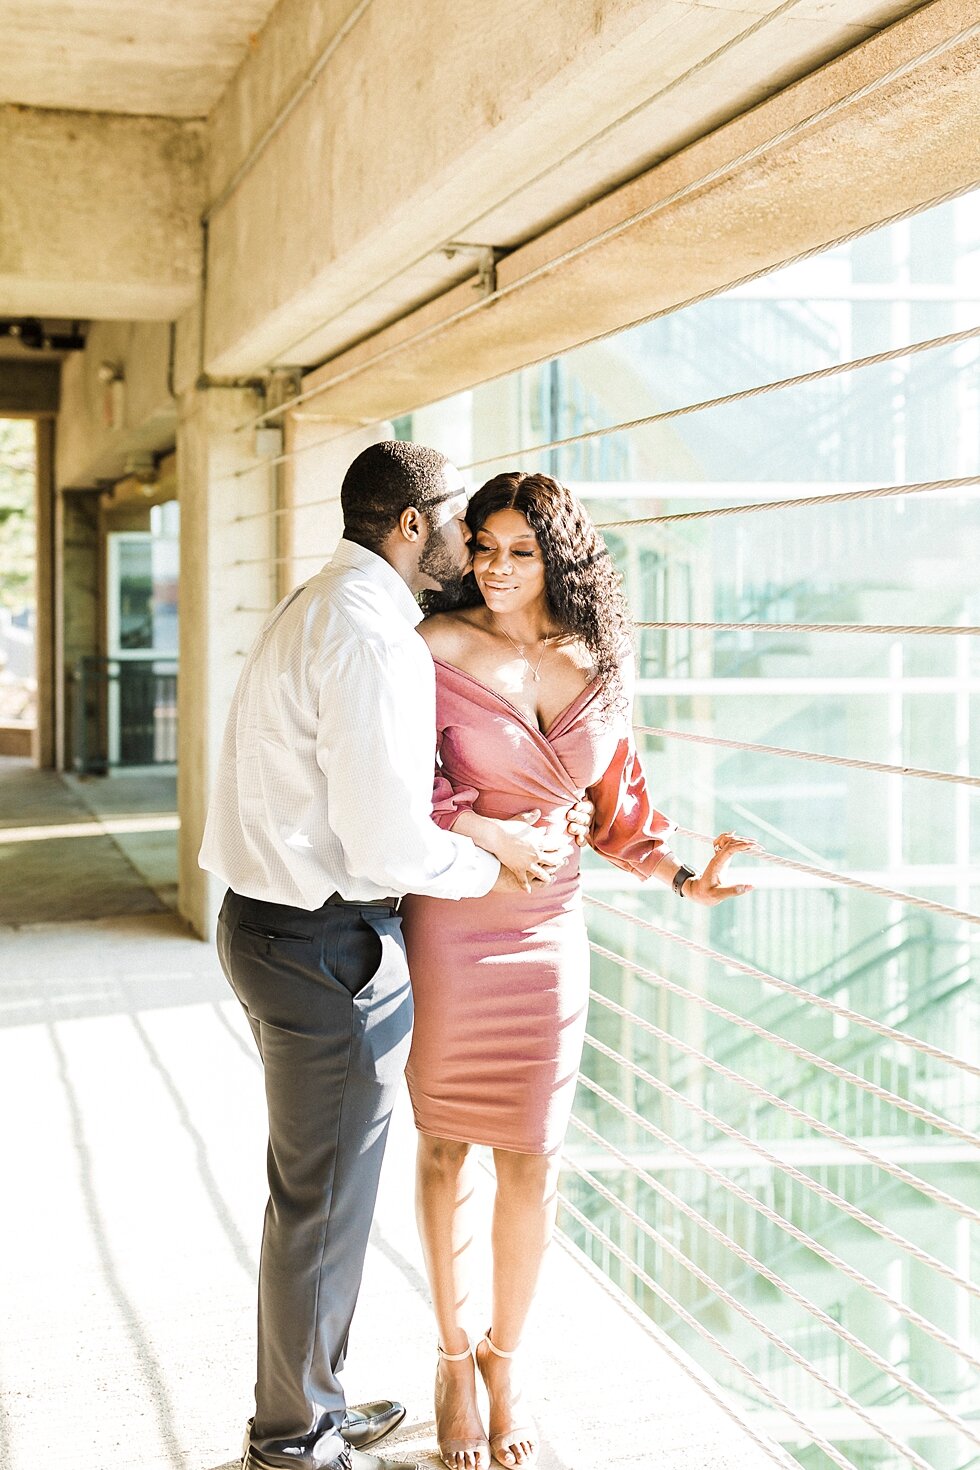  African American couple urban engagement pictures in downtown Louisville Muhammad Ali center and belvedere #engaged #muhumadalicenter #belvedere #shesaidyes #engaged #padbl #photographyanddesignbylauren #urban #city #urbanengagmentphotos #urbanengag